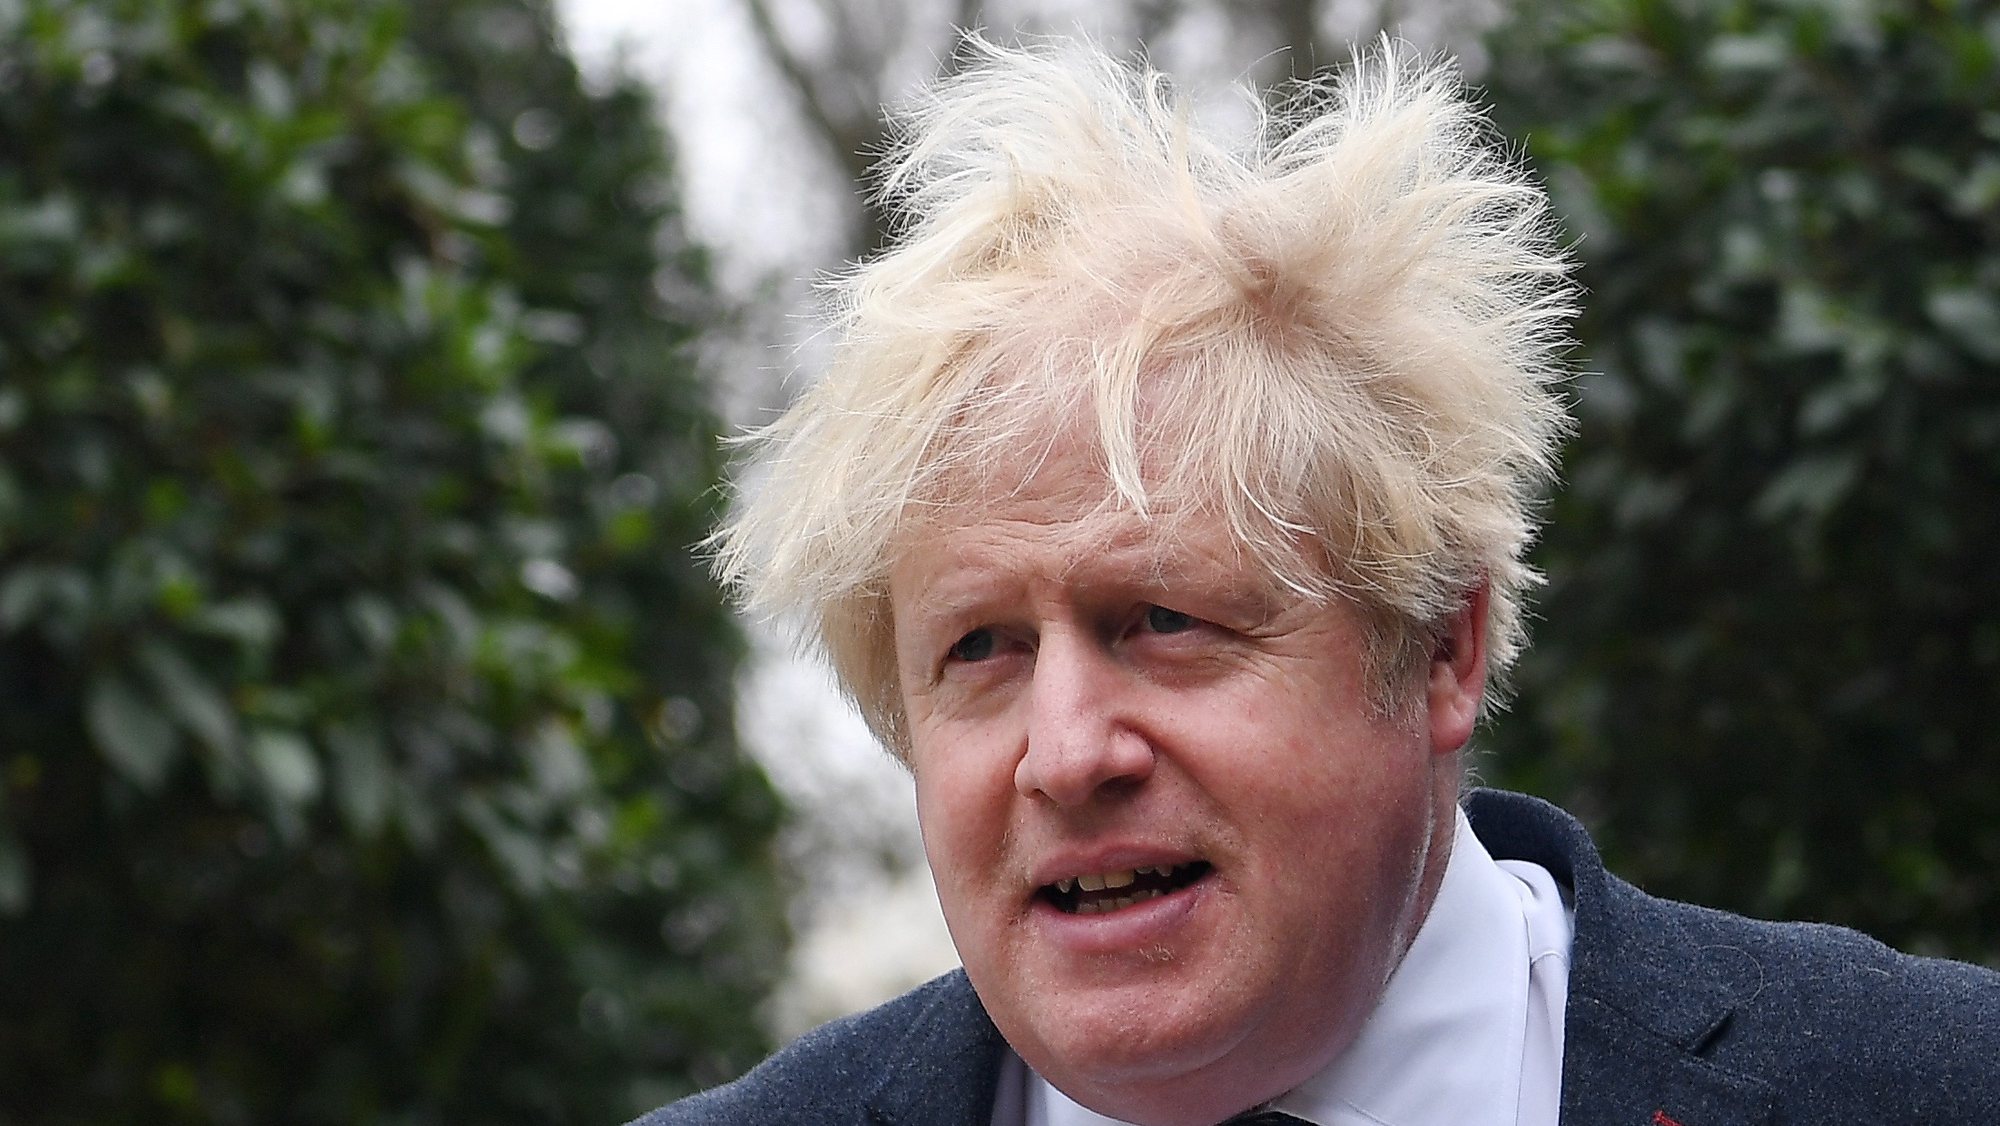 epa10534790 Former British Prime Minister Boris Johnson outside his home in London, Britain, 21 March 2023. Johnson is set to give evidence to MPs who are investigating accusations that he misled Parliament over Partygate, on 22 March.  EPA/ANDY RAIN